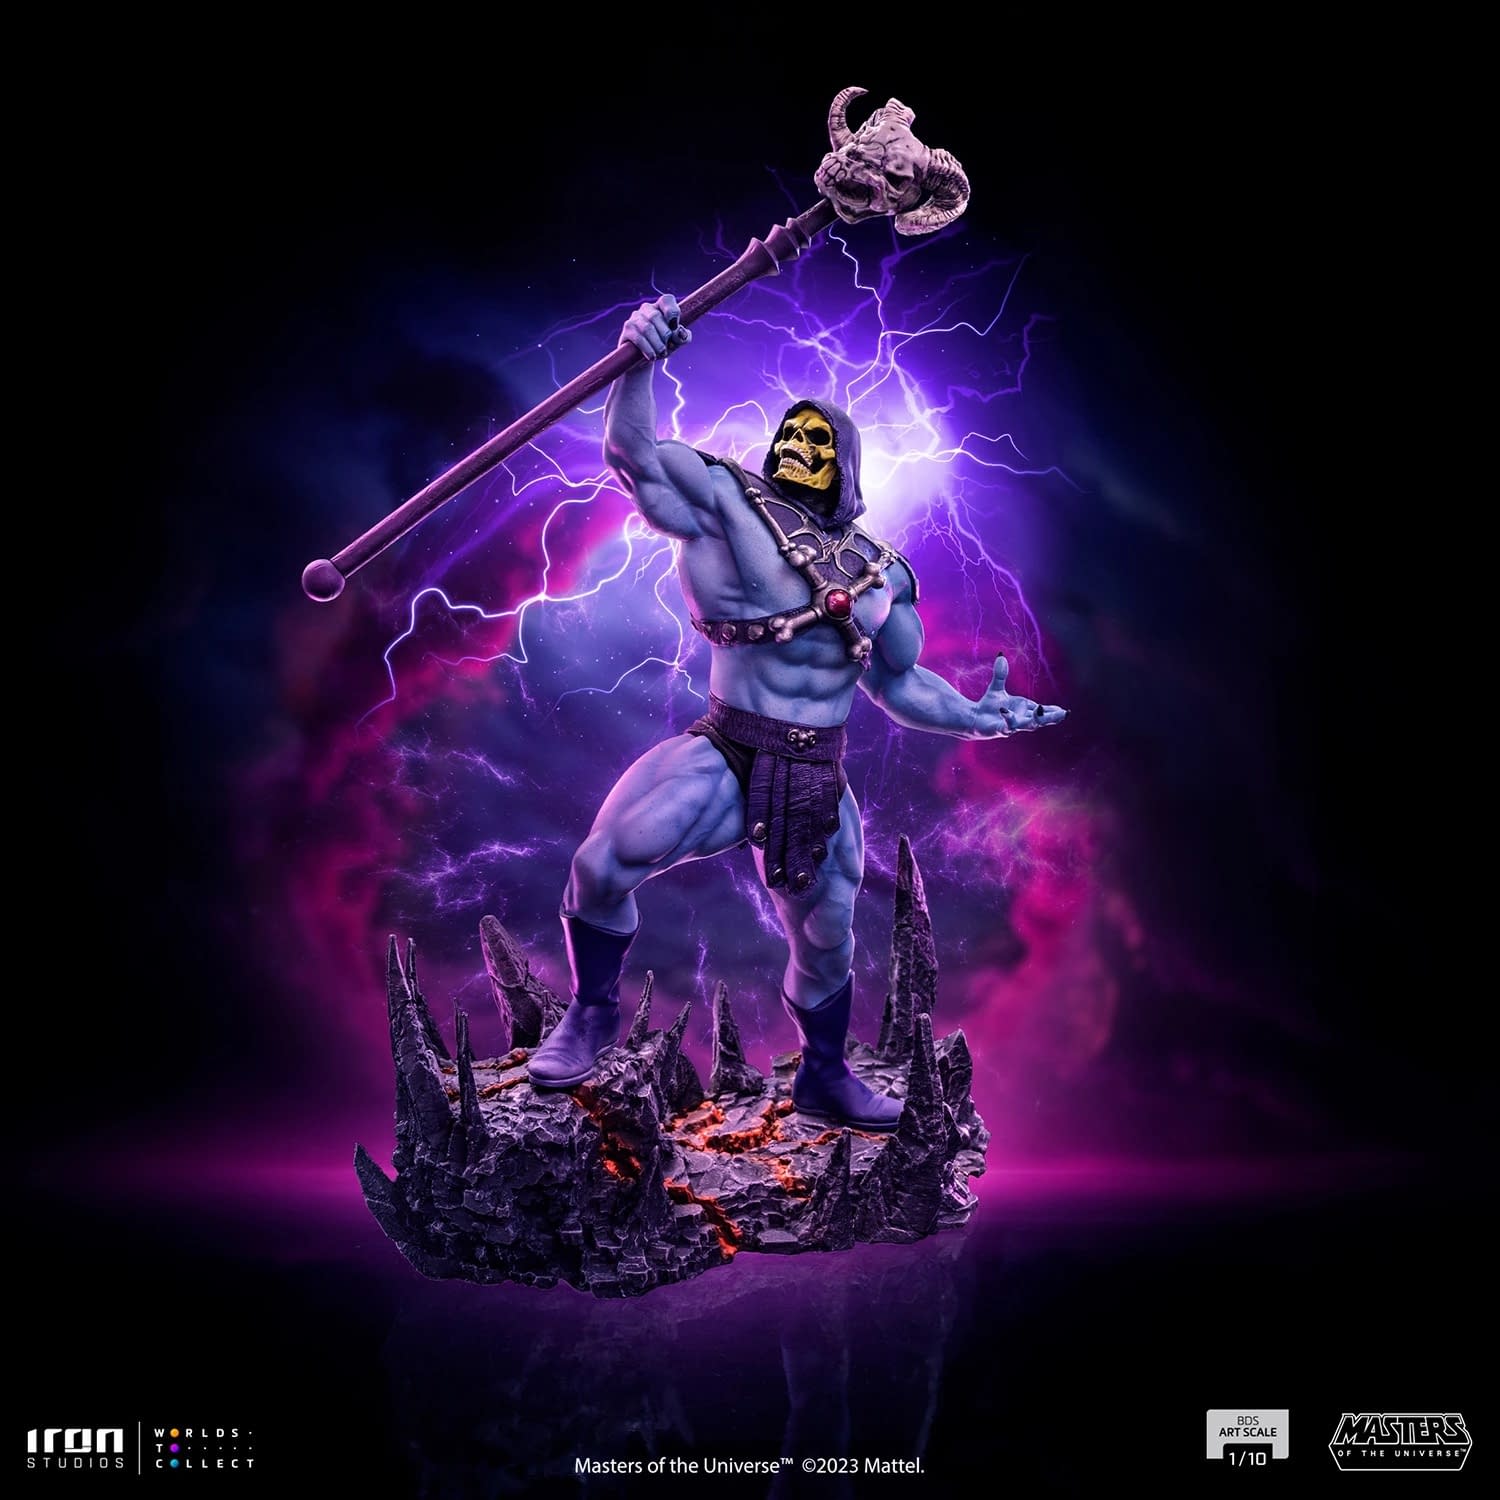 Masters of the Universe Skeletor Unleashed His Power with Iron Studios